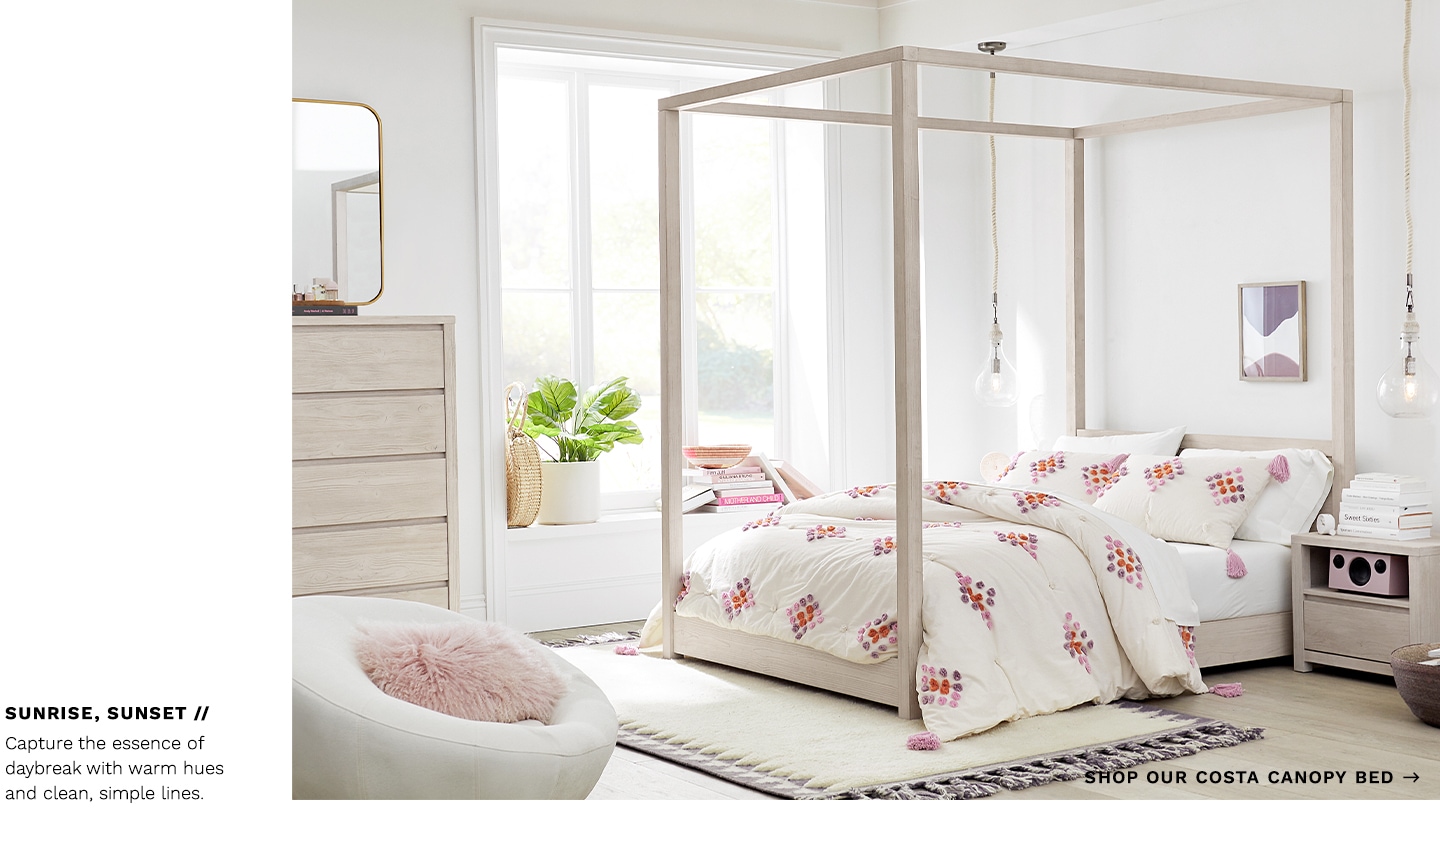 Shop Our Costa Canopy Bed